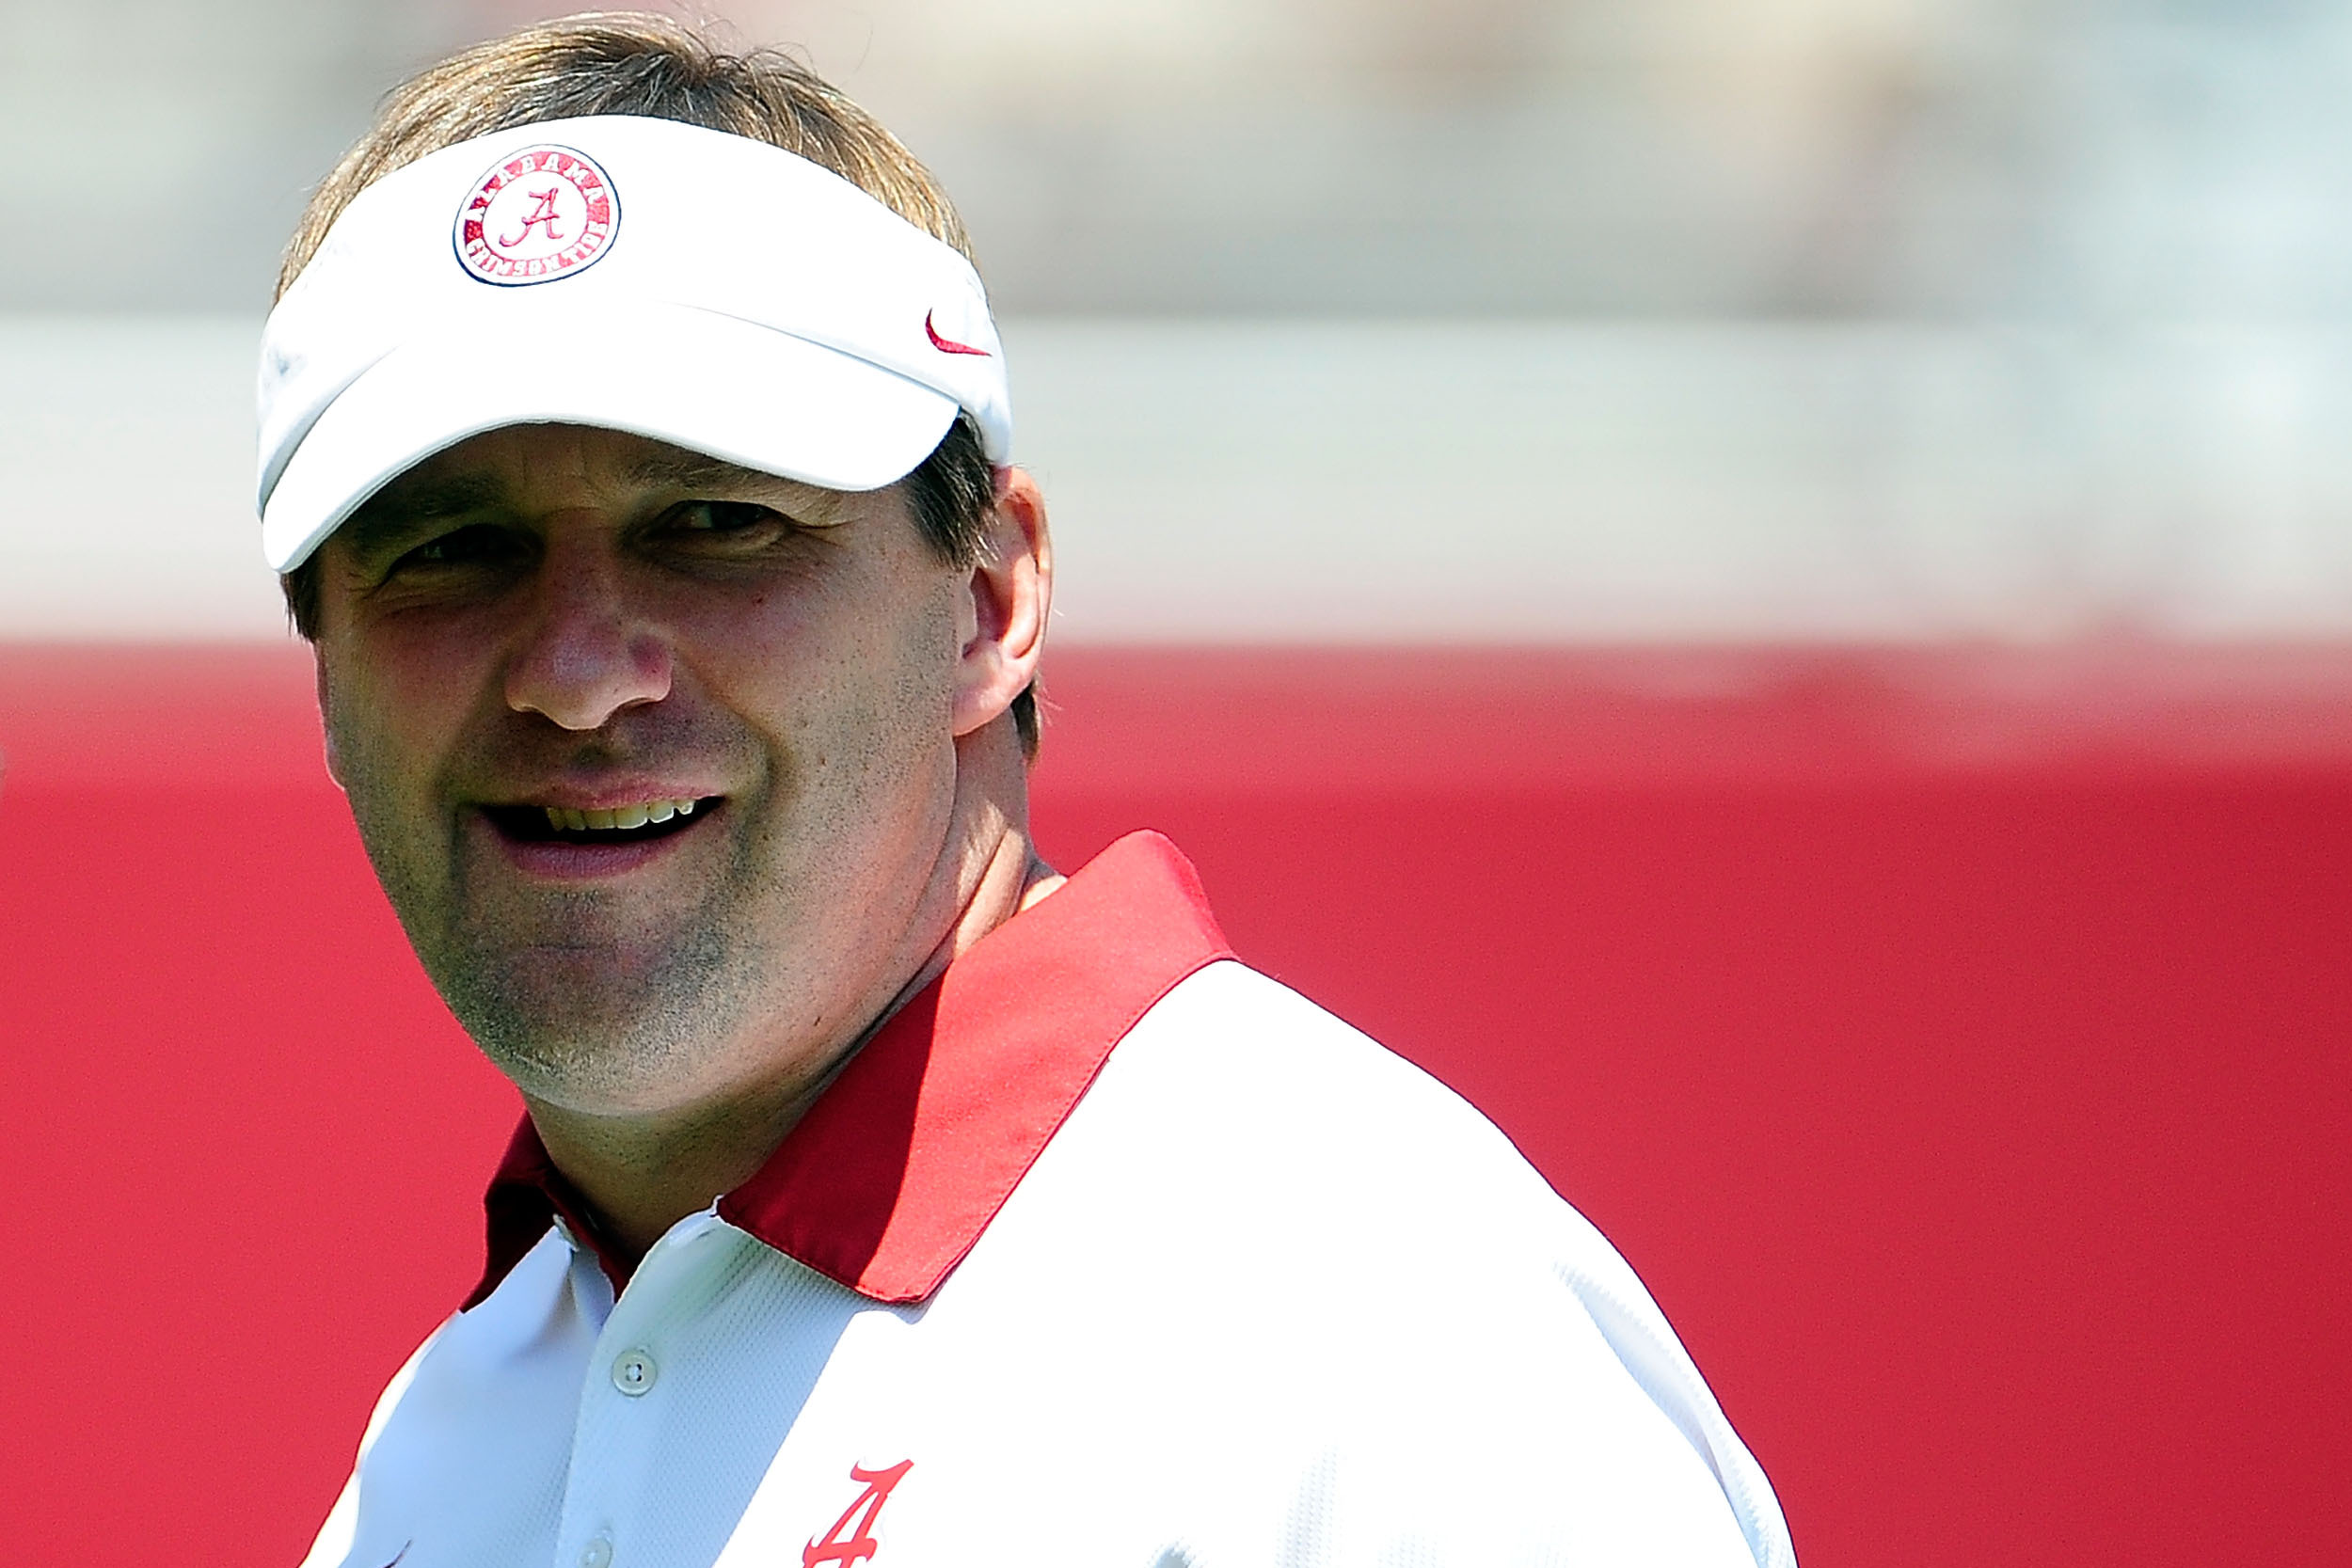 Kirby Smart: Coaching Record, Career, Age